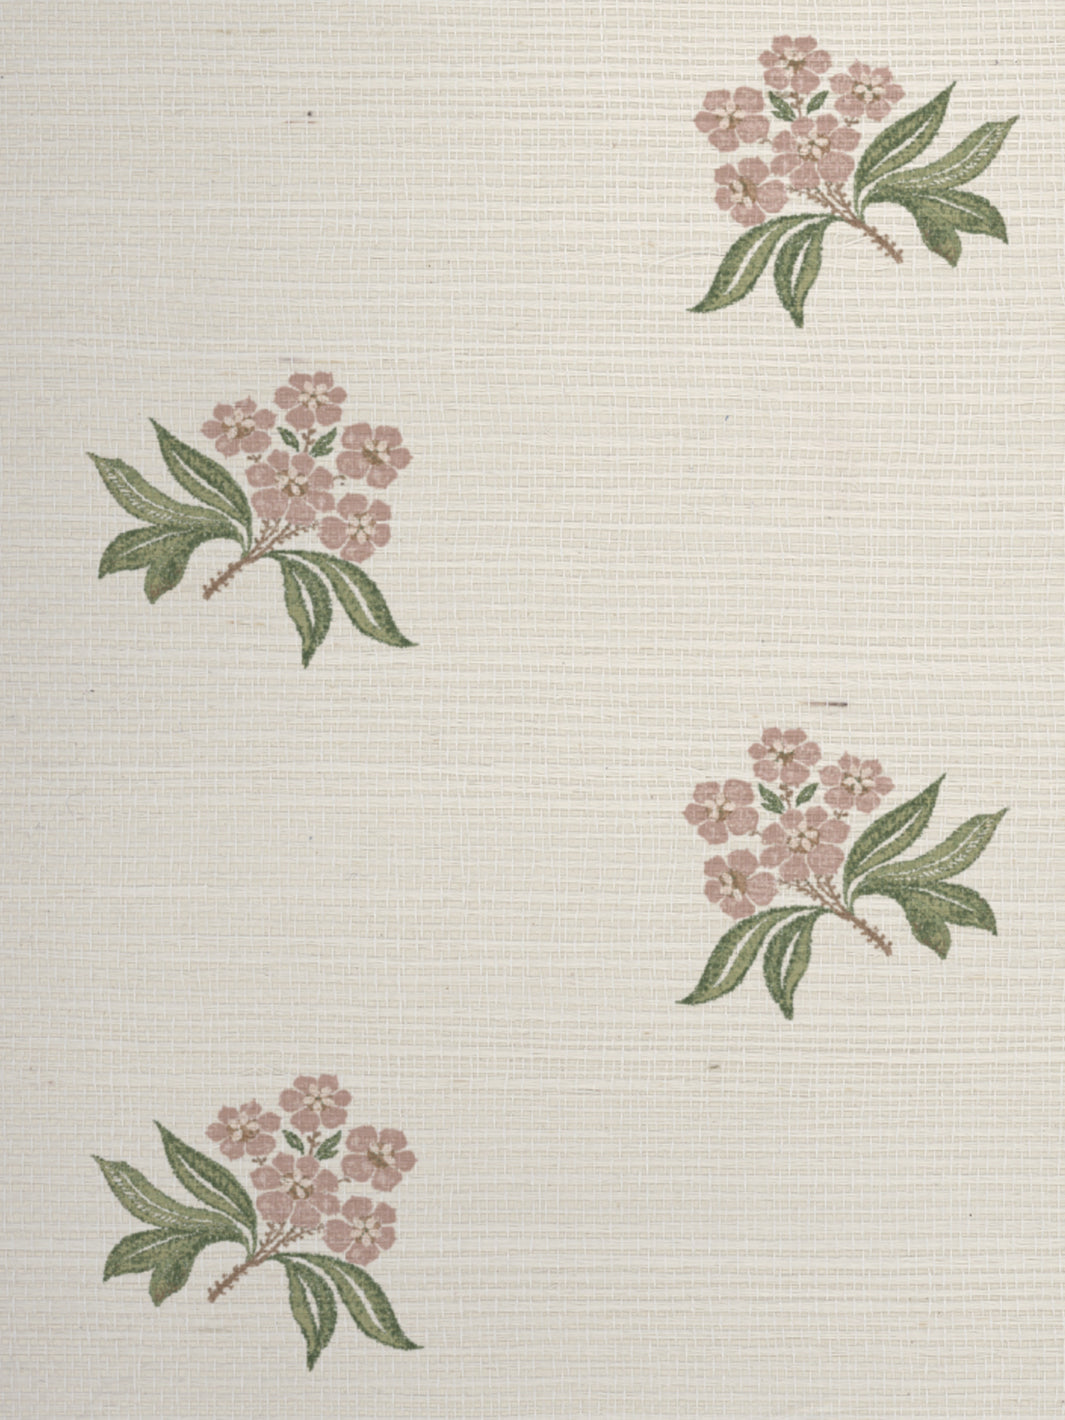 'Marian Ditsy' Grasscloth Wallpaper by Nathan Turner - Pink Green